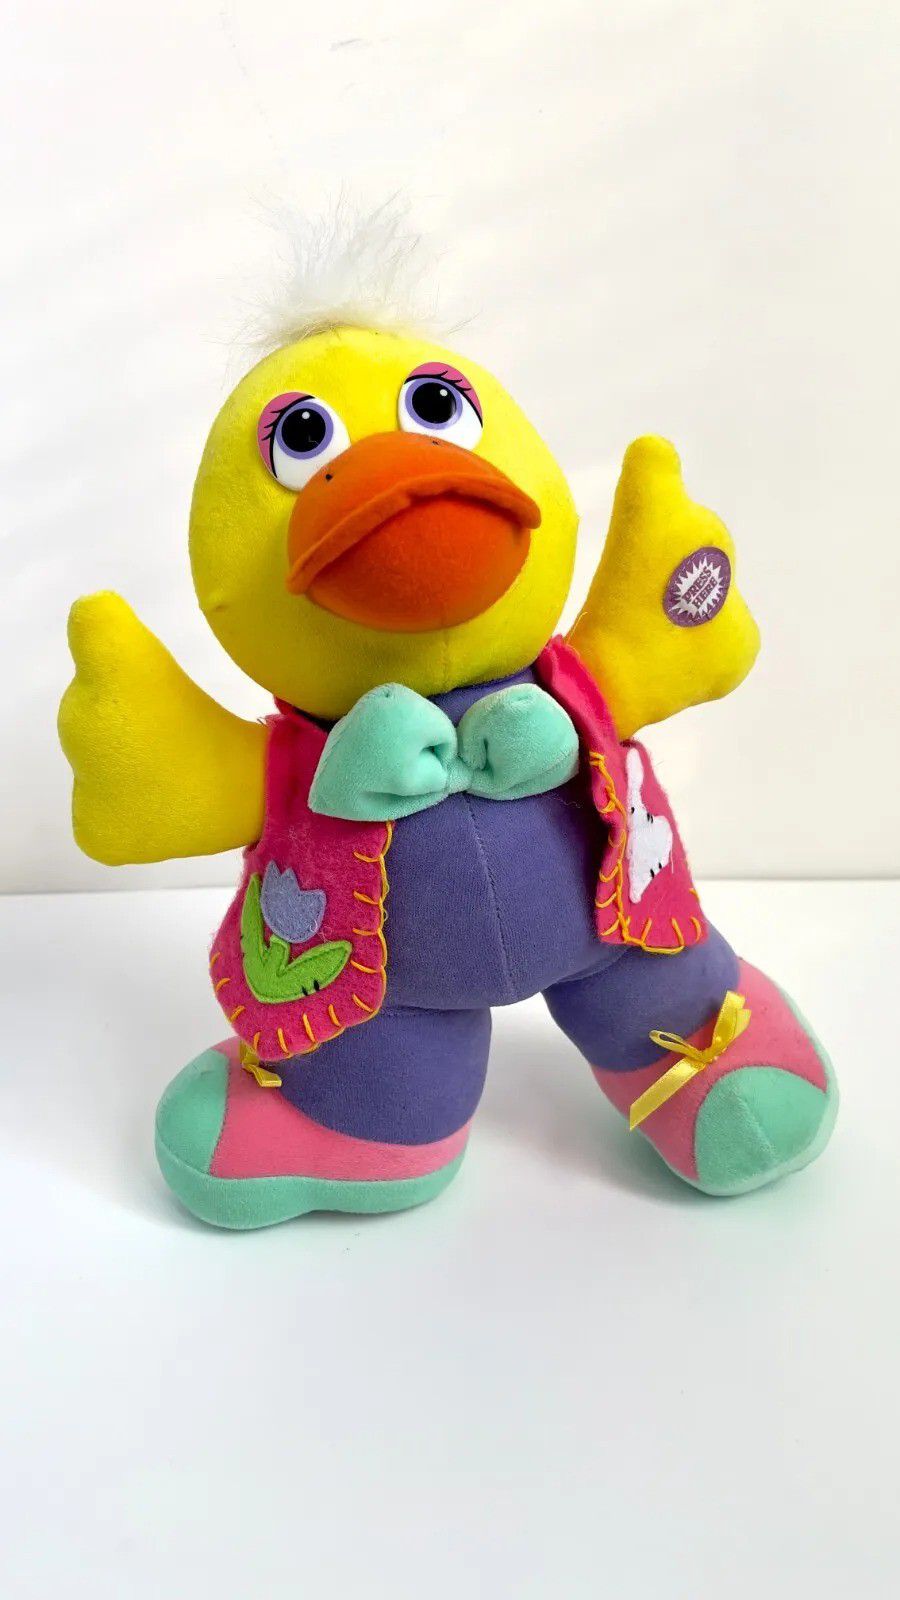 MTY Easter Shakin' Animated Singing Dancing Easter Duck Plush